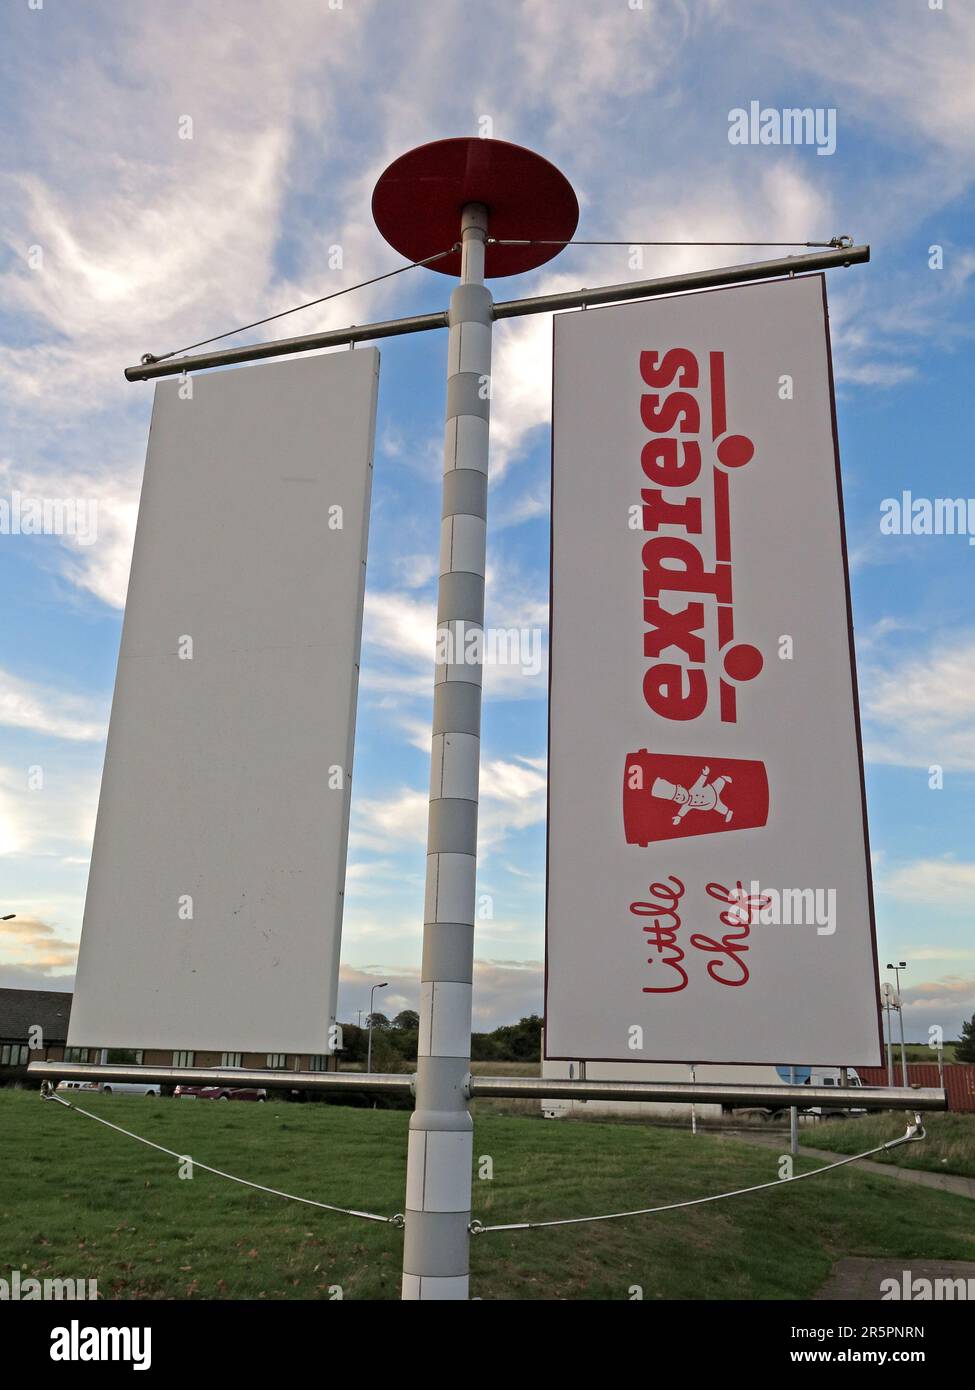 https://c8.alamy.com/comp/2R5PNRN/failed-brands-and-branding-little-chef-express-sign-2013-fast-food-on-m5-motorway-services-gloucestershire-england-uk-2R5PNRN.jpg